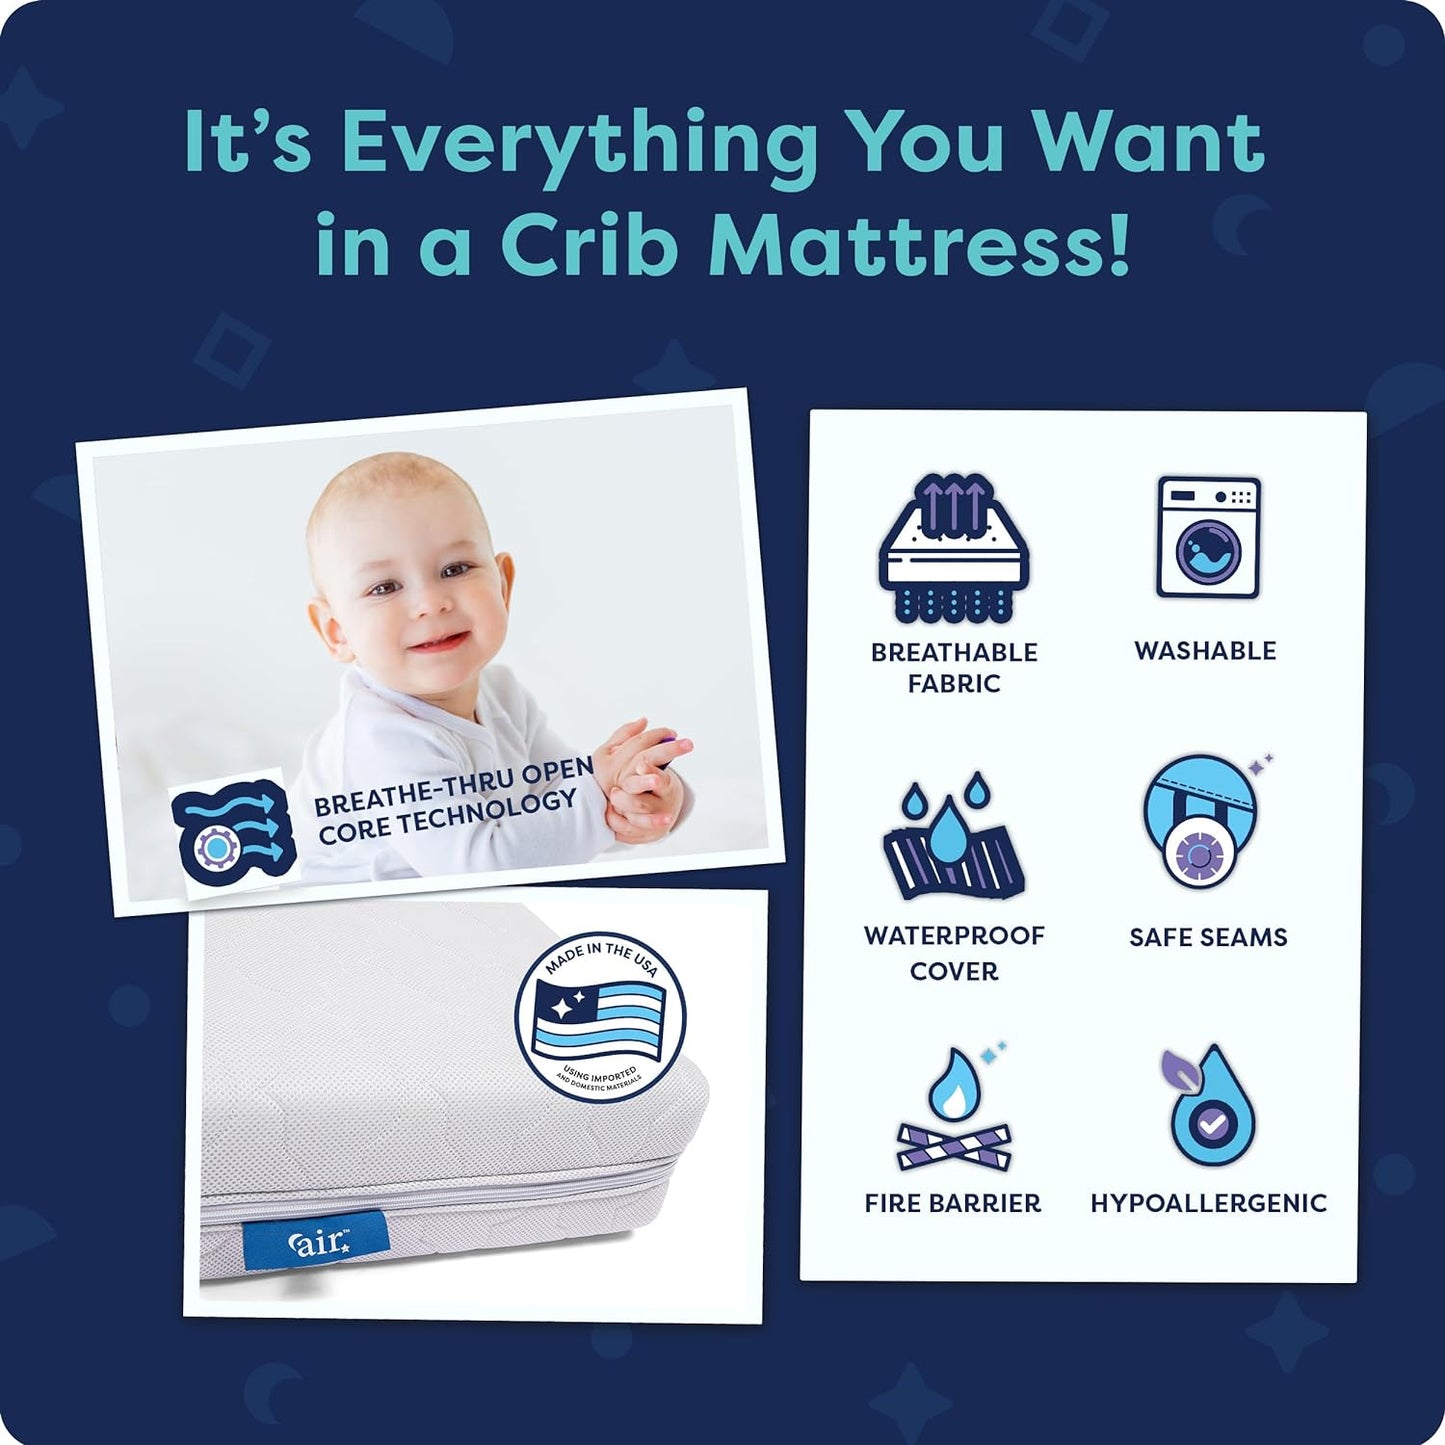 Moonlight Slumber Air Crib Mattress - Breathable Crib Mattress for Baby and Toddler - Innovative Breathe-Thru Open Core Technology for Infant Safety and Comfort - Dual-Sided, Waterproof, 5.5in.